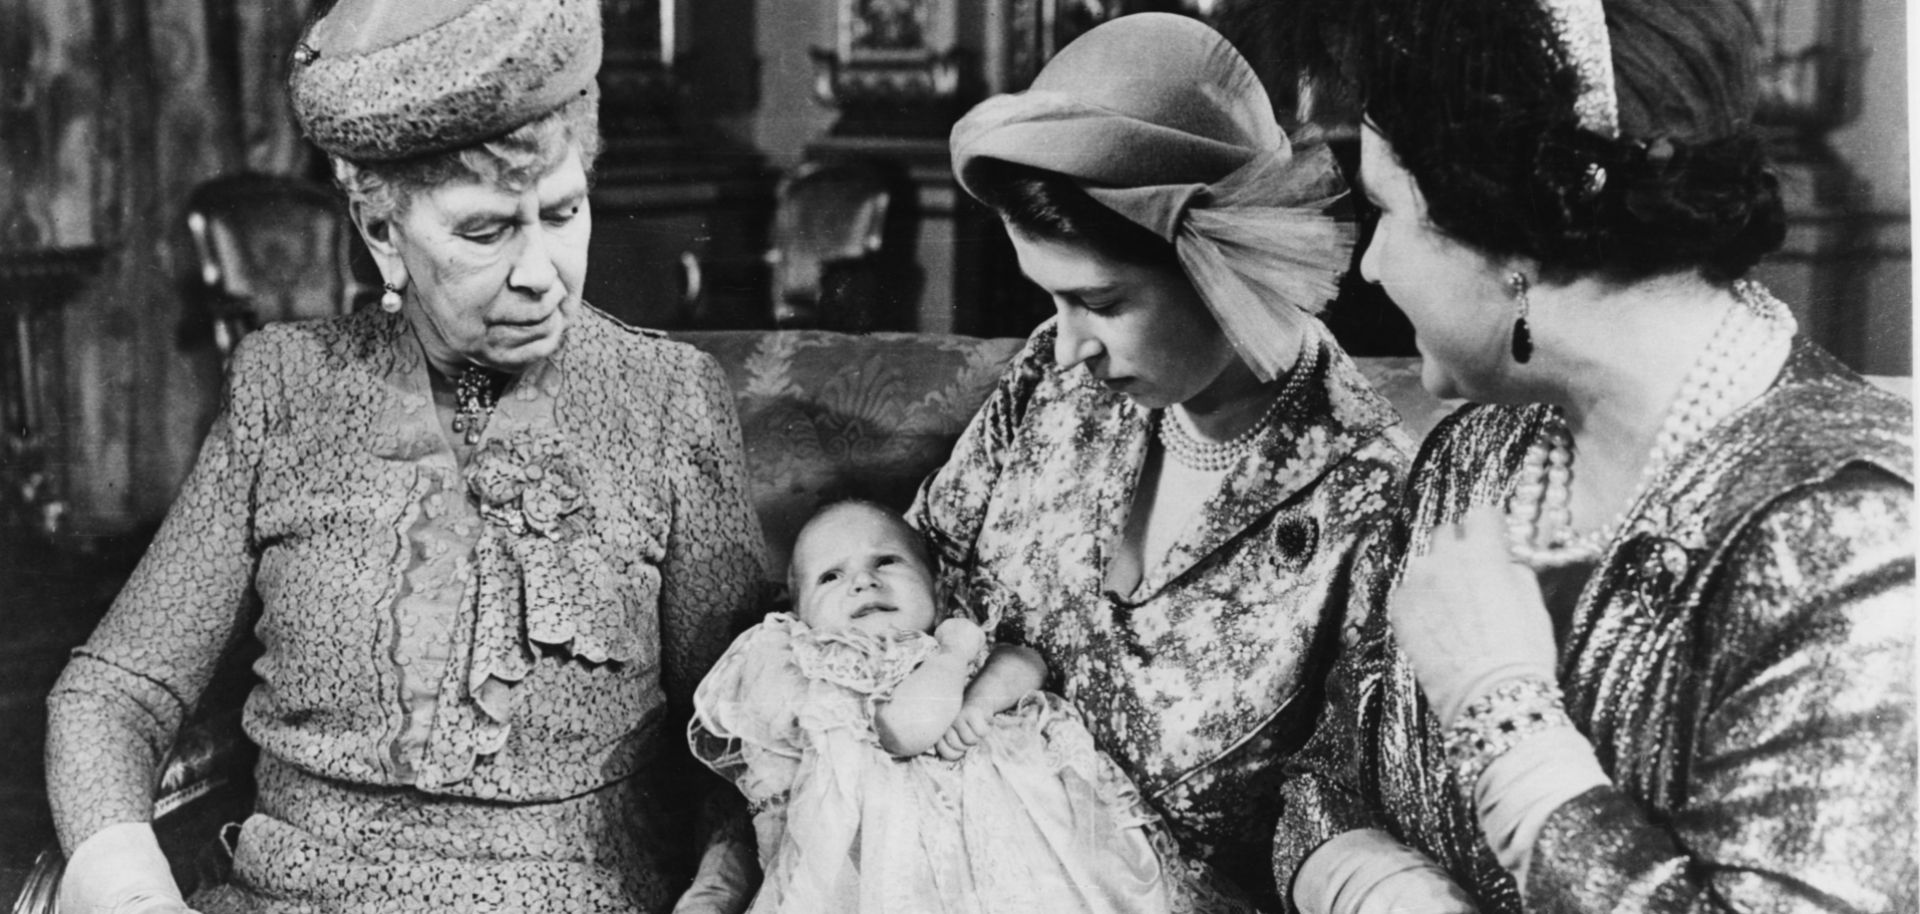 Princess Elizabeth (later Queen Elizabeth II) holds her daughter, Princess Anne, at Anne's christening in Buckingham Palace on Oct. 21, 1950. Elizabeth's grandmother, Queen Mary, left, and her mother, Queen Elizabeth are also pictured.